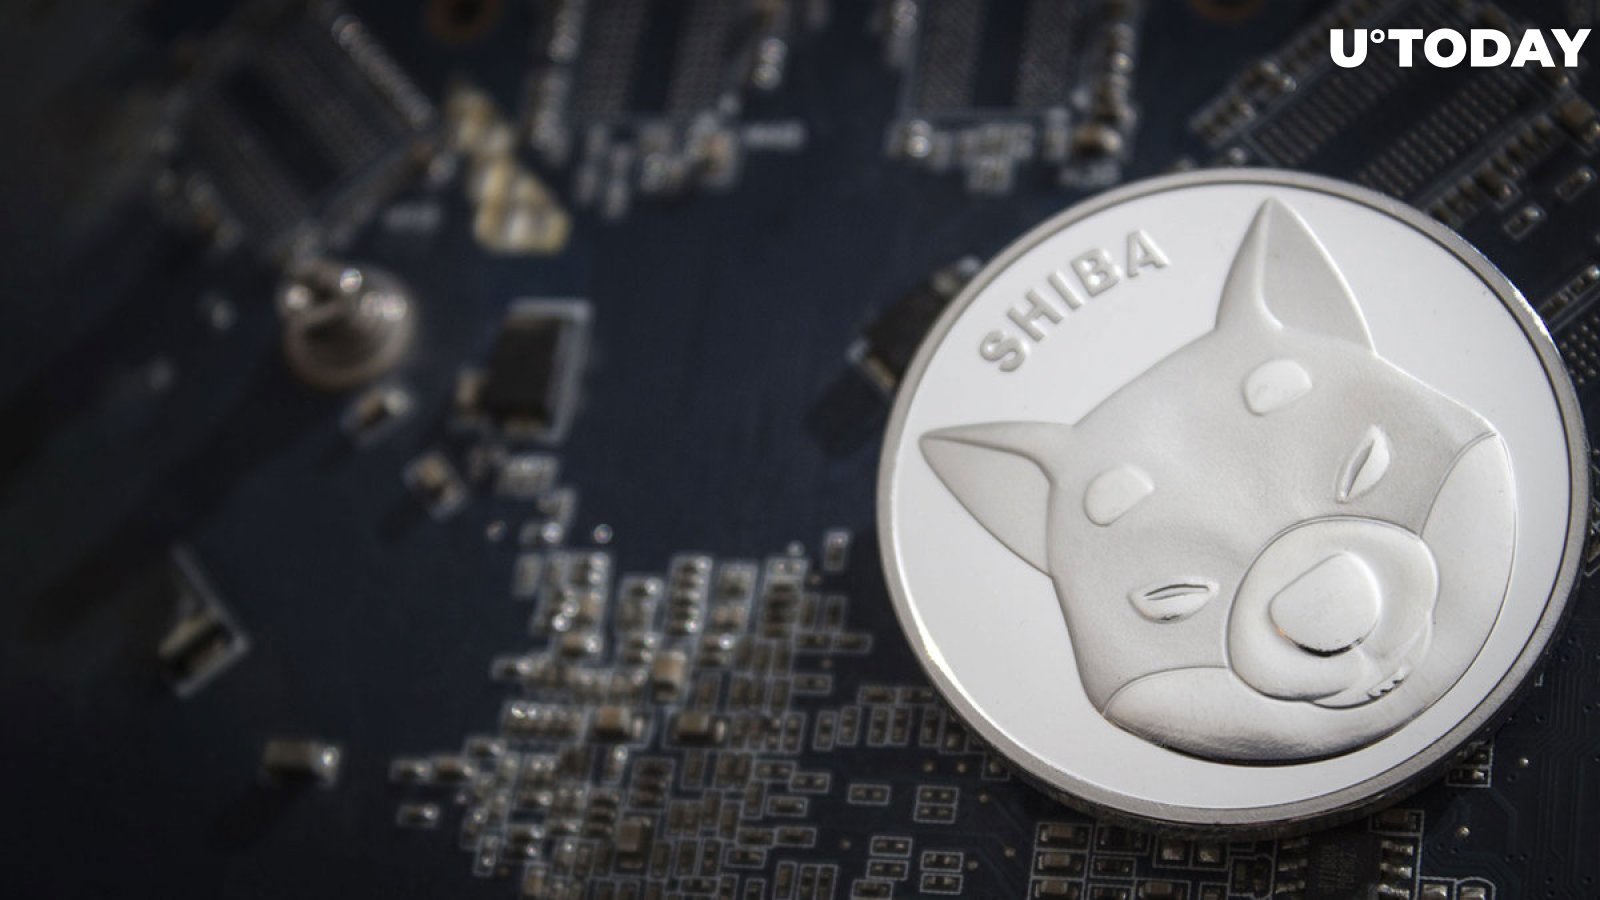 Shiba Inu (SHIB) 'Calm Before Storm' Updates Revealed by Shiba Ecosystem Official